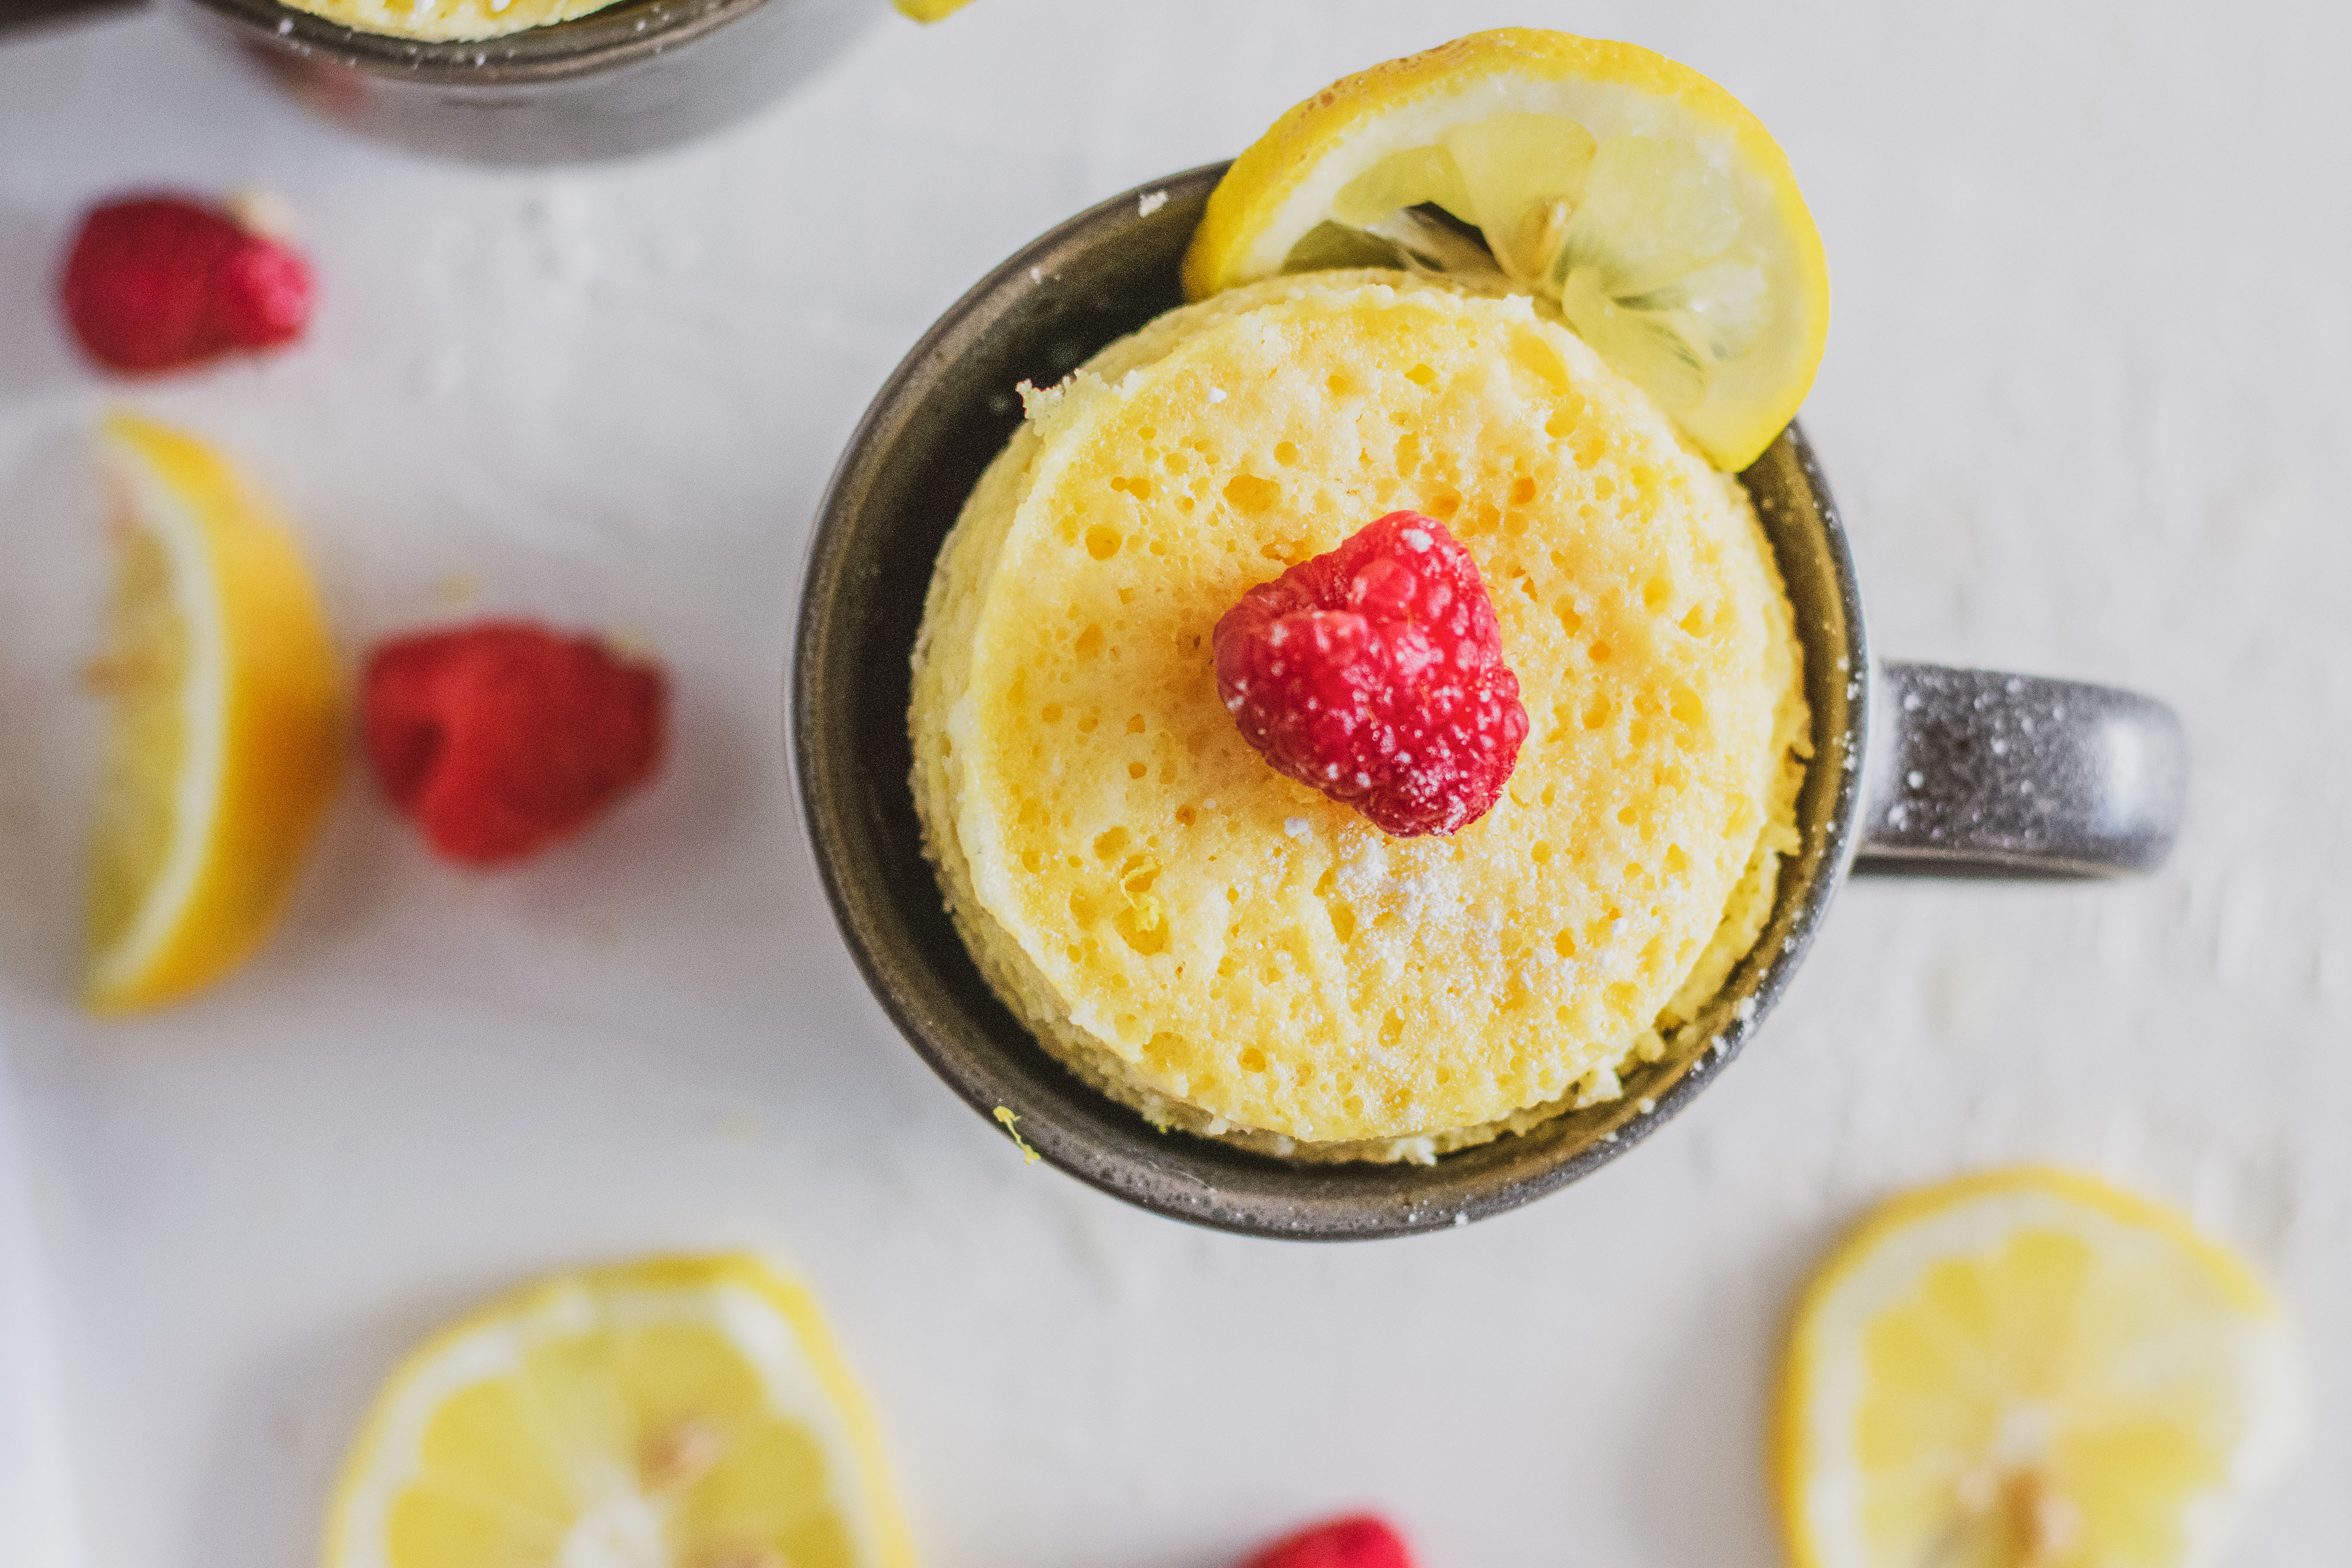 Low carb lemon mug cakes in a grey mug with raspberries and lemon slices on a white surface.